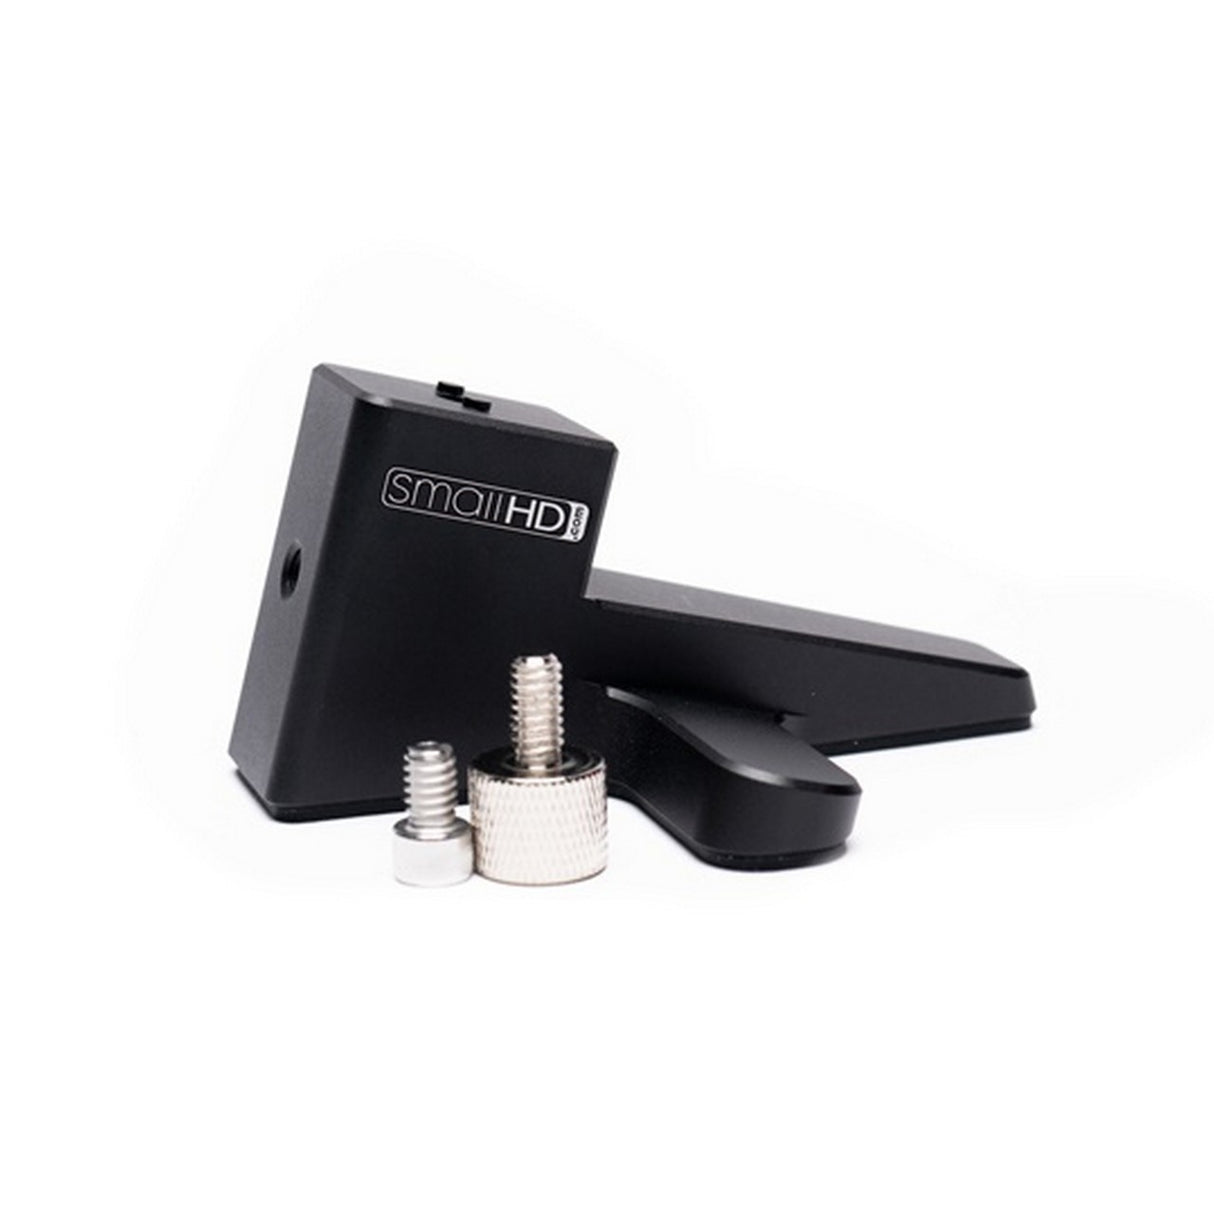 SmallHD ACC-MT-7-TBLSTAND Table Stand for 7 Inch Monitors with C-Stand Mount